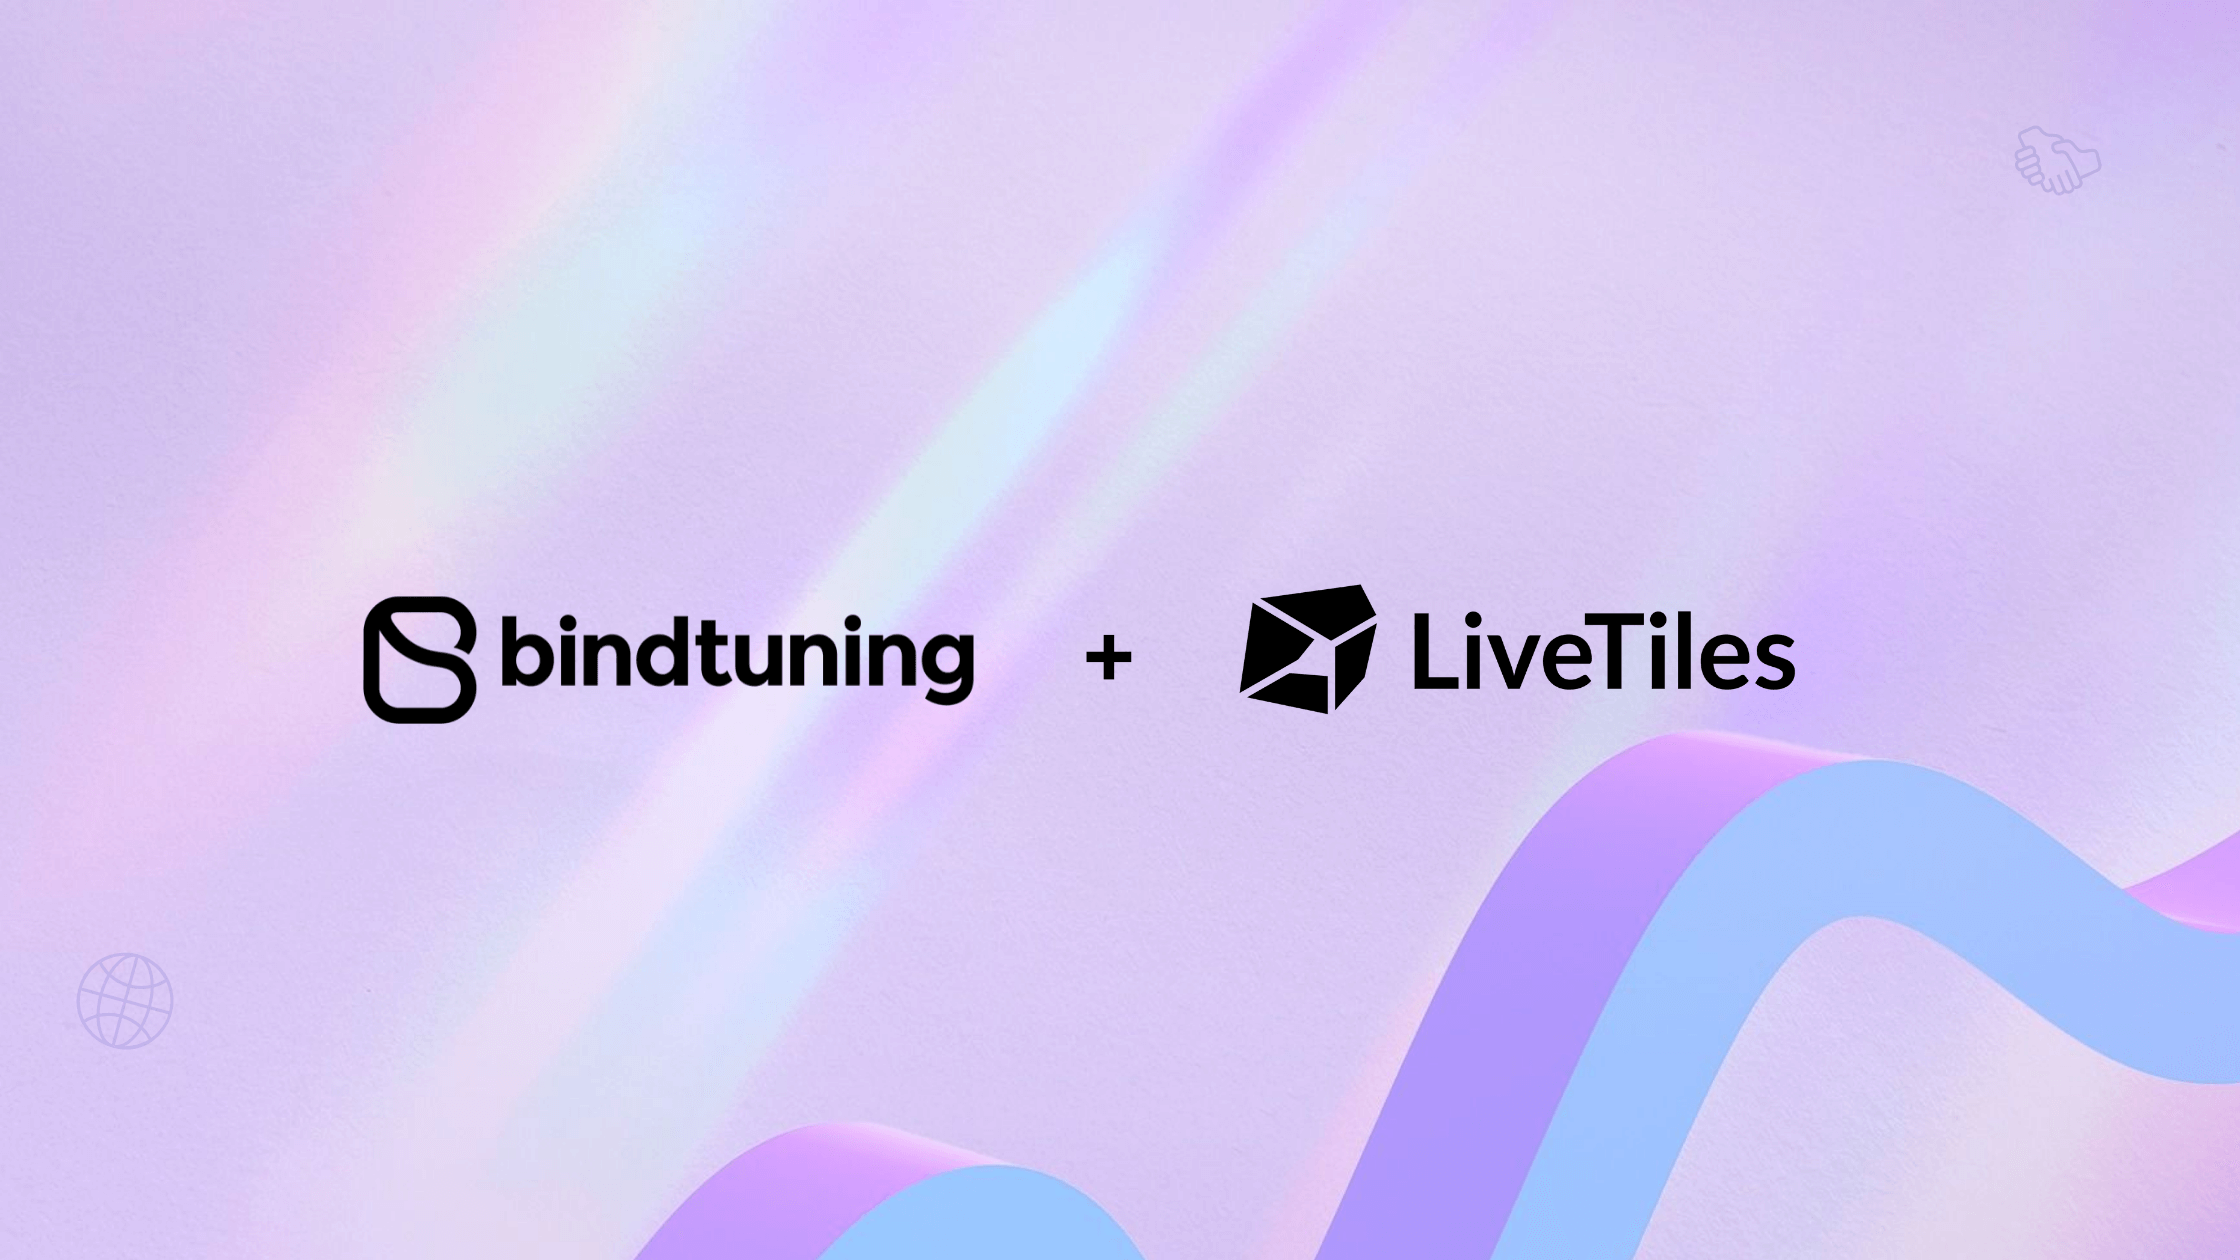 bindtuning-and-livetiles-team-up-to-improve-the-employee-experience